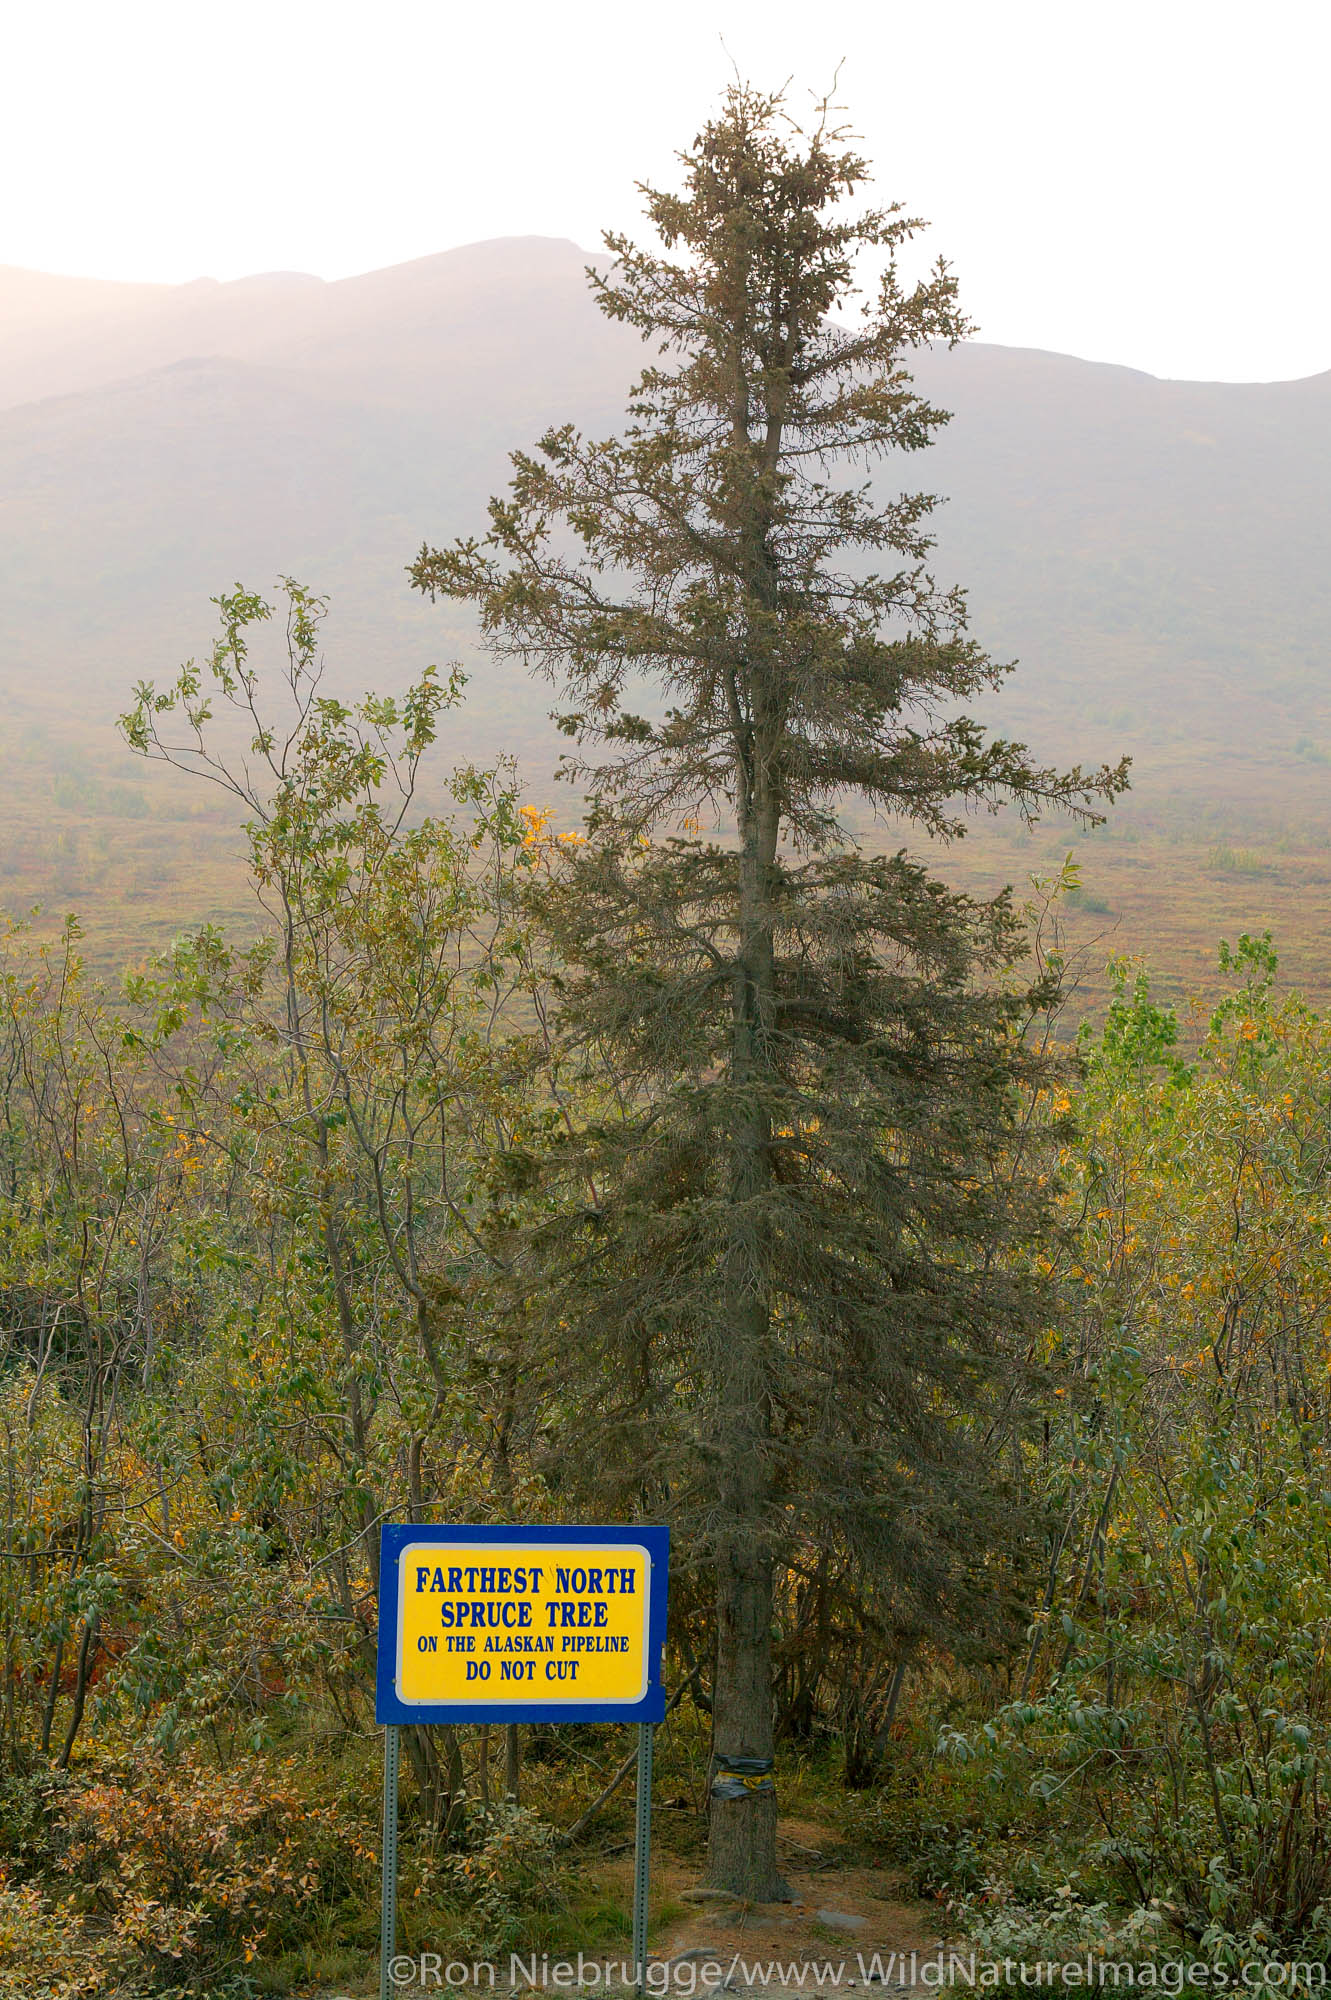 The farthest North spruce tree in the Brooks Range from the Dalton Highway, Alaska.